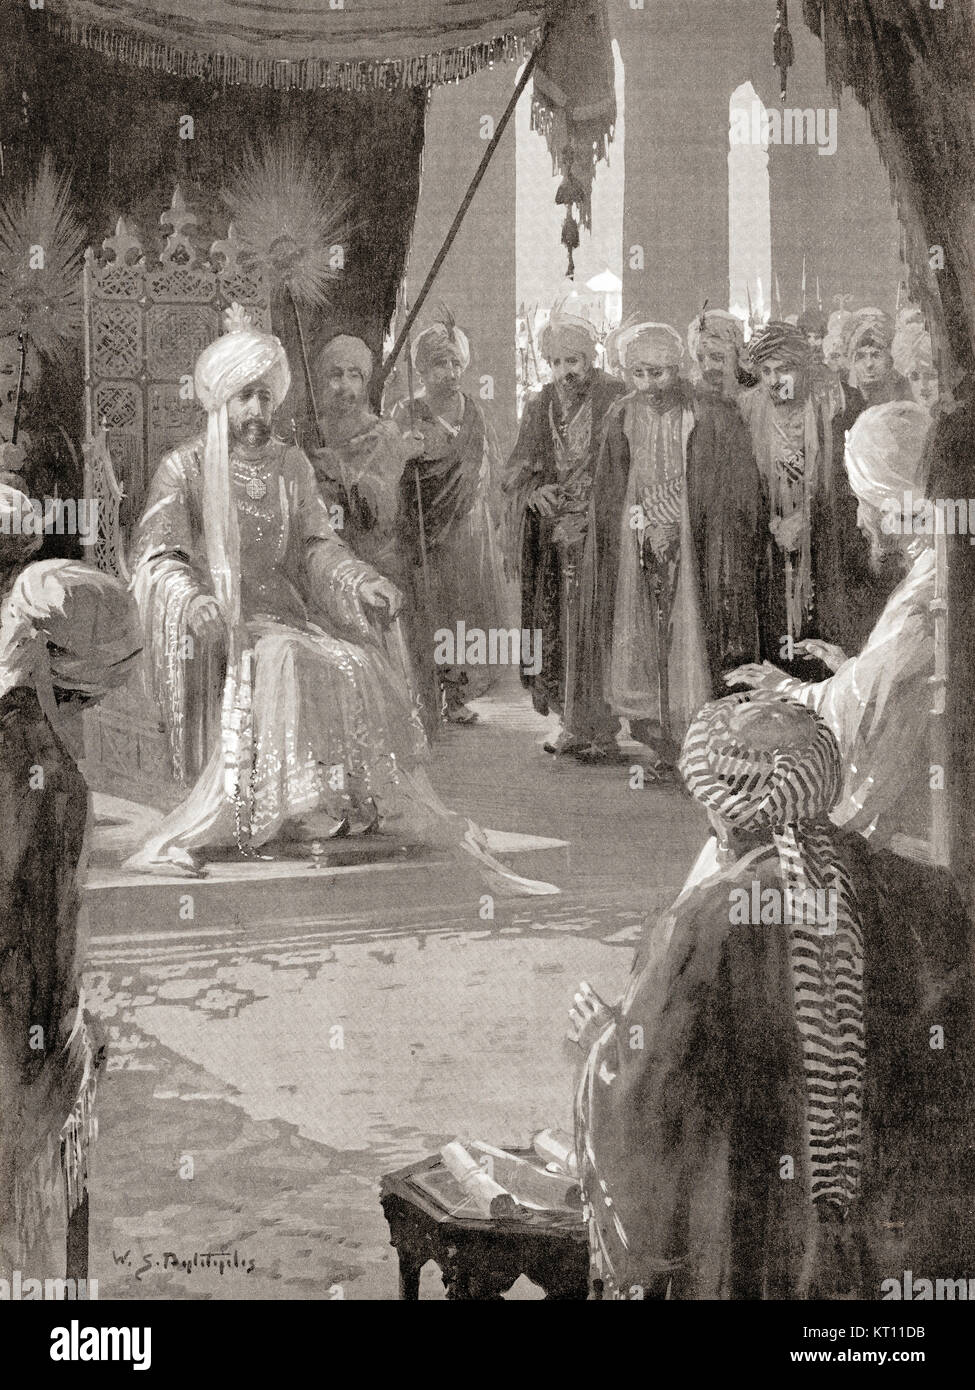 The Exilarch,  leader of the Diaspora Jewish community in Babylon following the deportation of King Jeconiah and his court into Babylonian exile after the first fall of Jerusalem in 597 BC.   After the painting by W.S. Bagdatopoulus (1888-1965).  From Hutchinson's History of the Nations, published 1915. Stock Photo